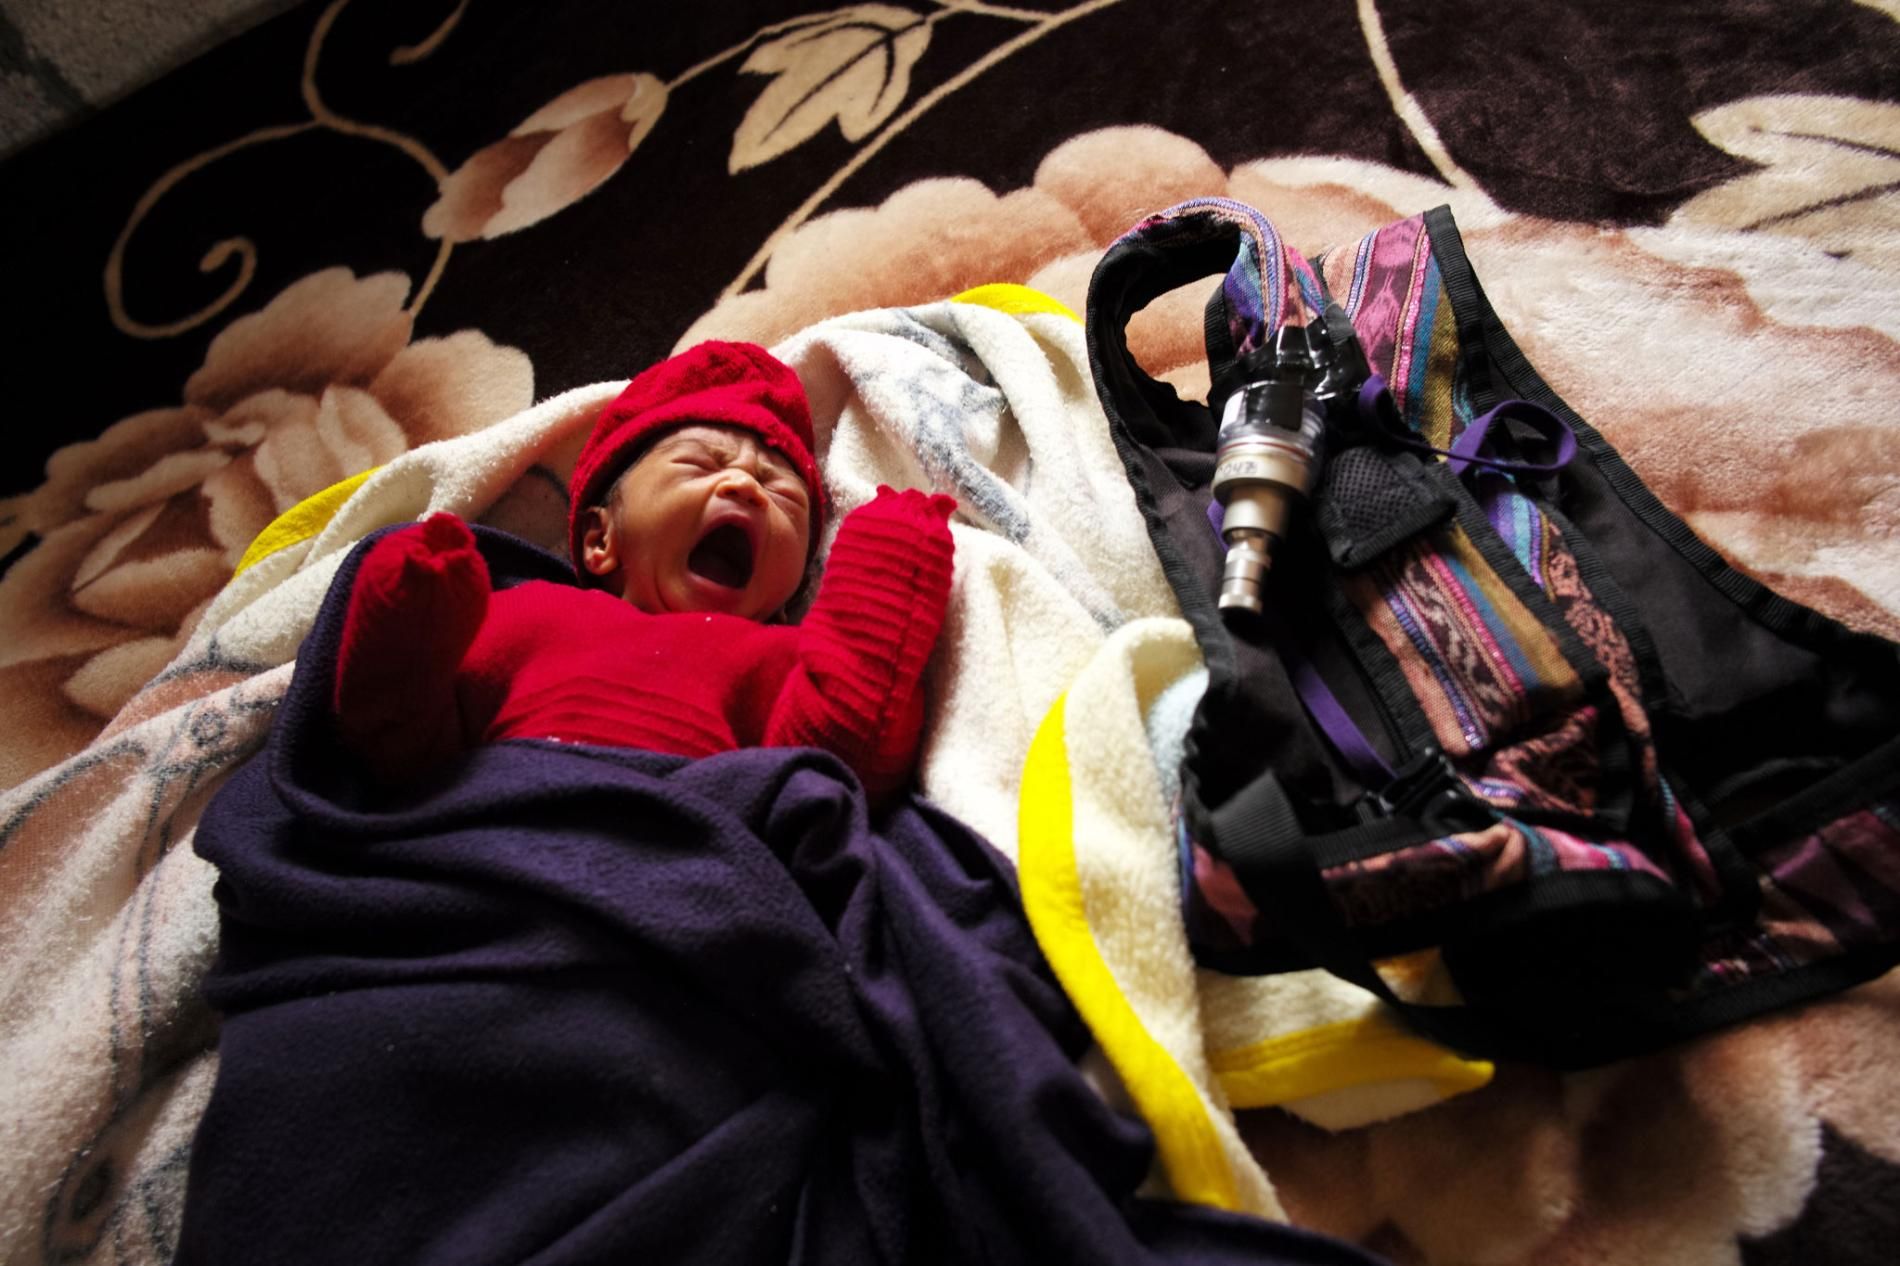 Dina Marroquín’s eight-day-old baby rests next to a knapsack holding an indoor air monitor—part of study being done by an international research team to determine whether the use of gas stoves improves air quality and the health of children. Image by Lynn Johnson. Guatemala, 2017.